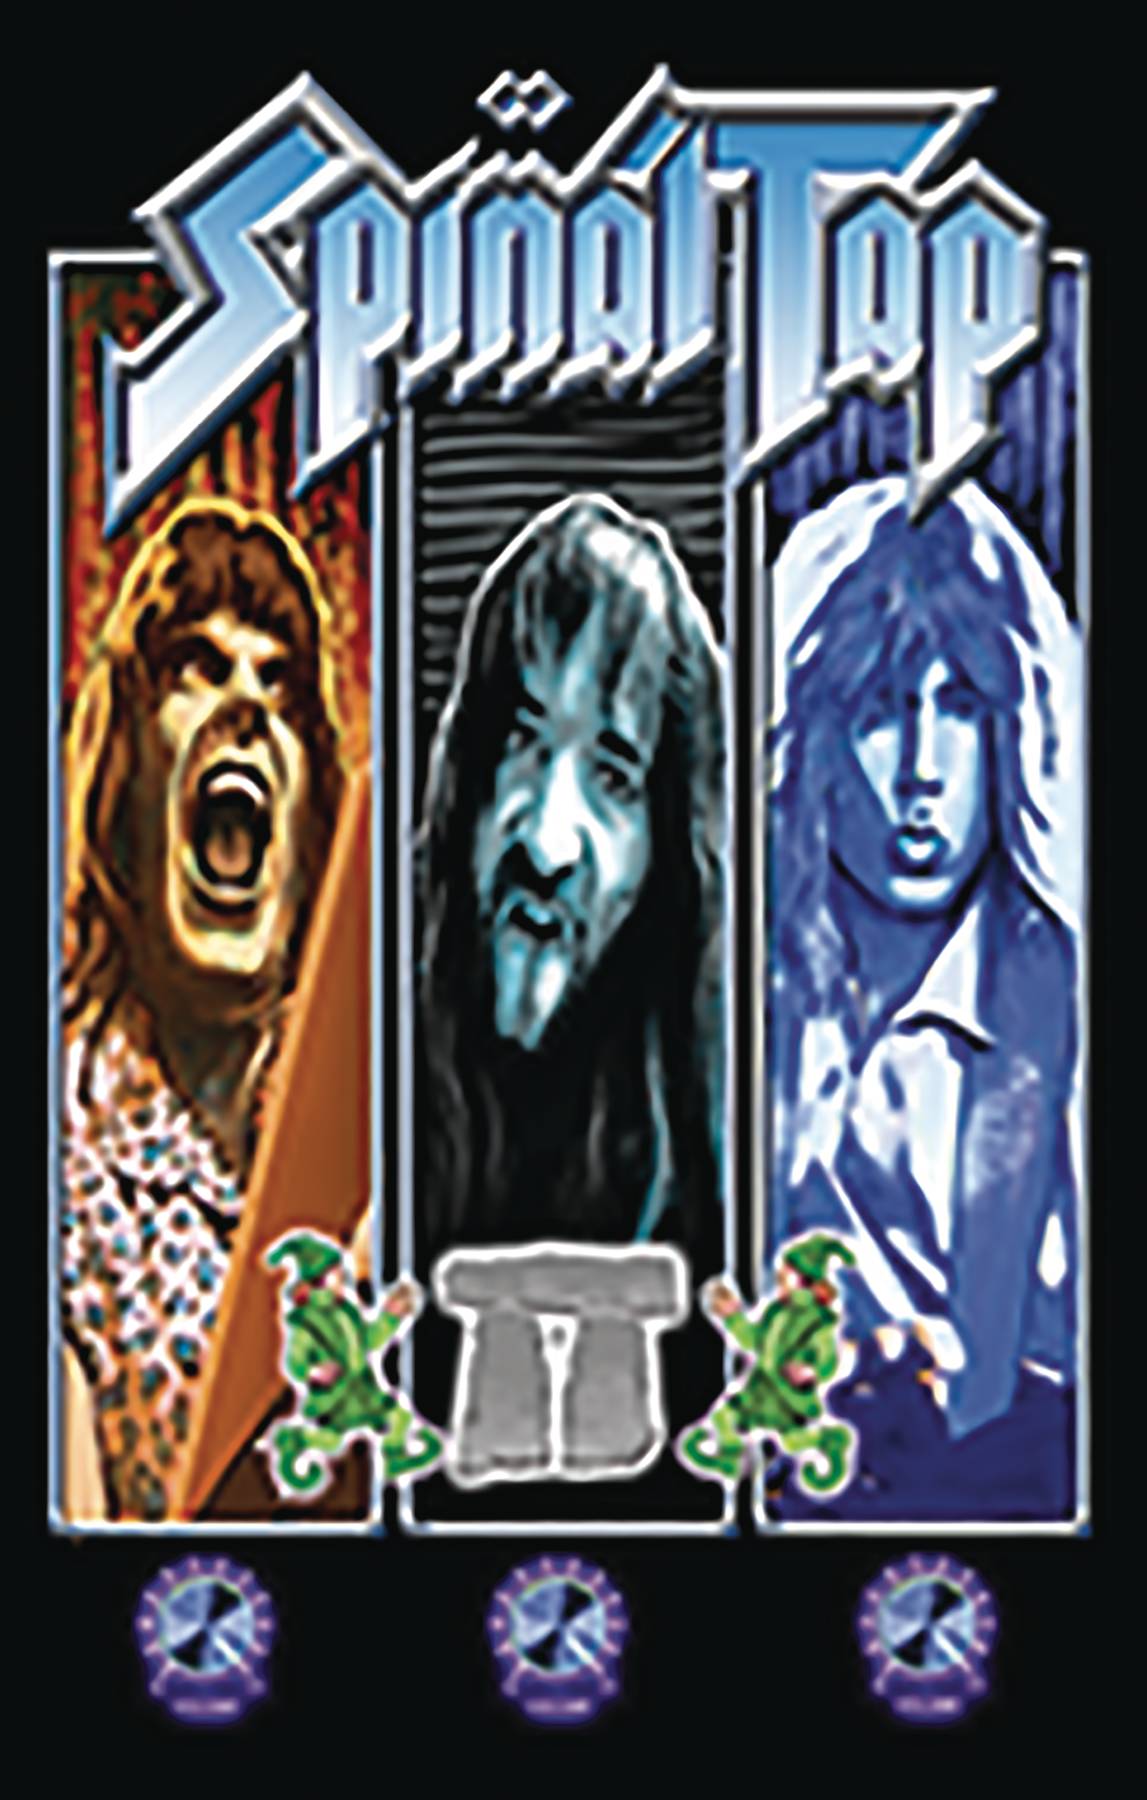 Rock & Roll Biographies #12 Spinal Tap